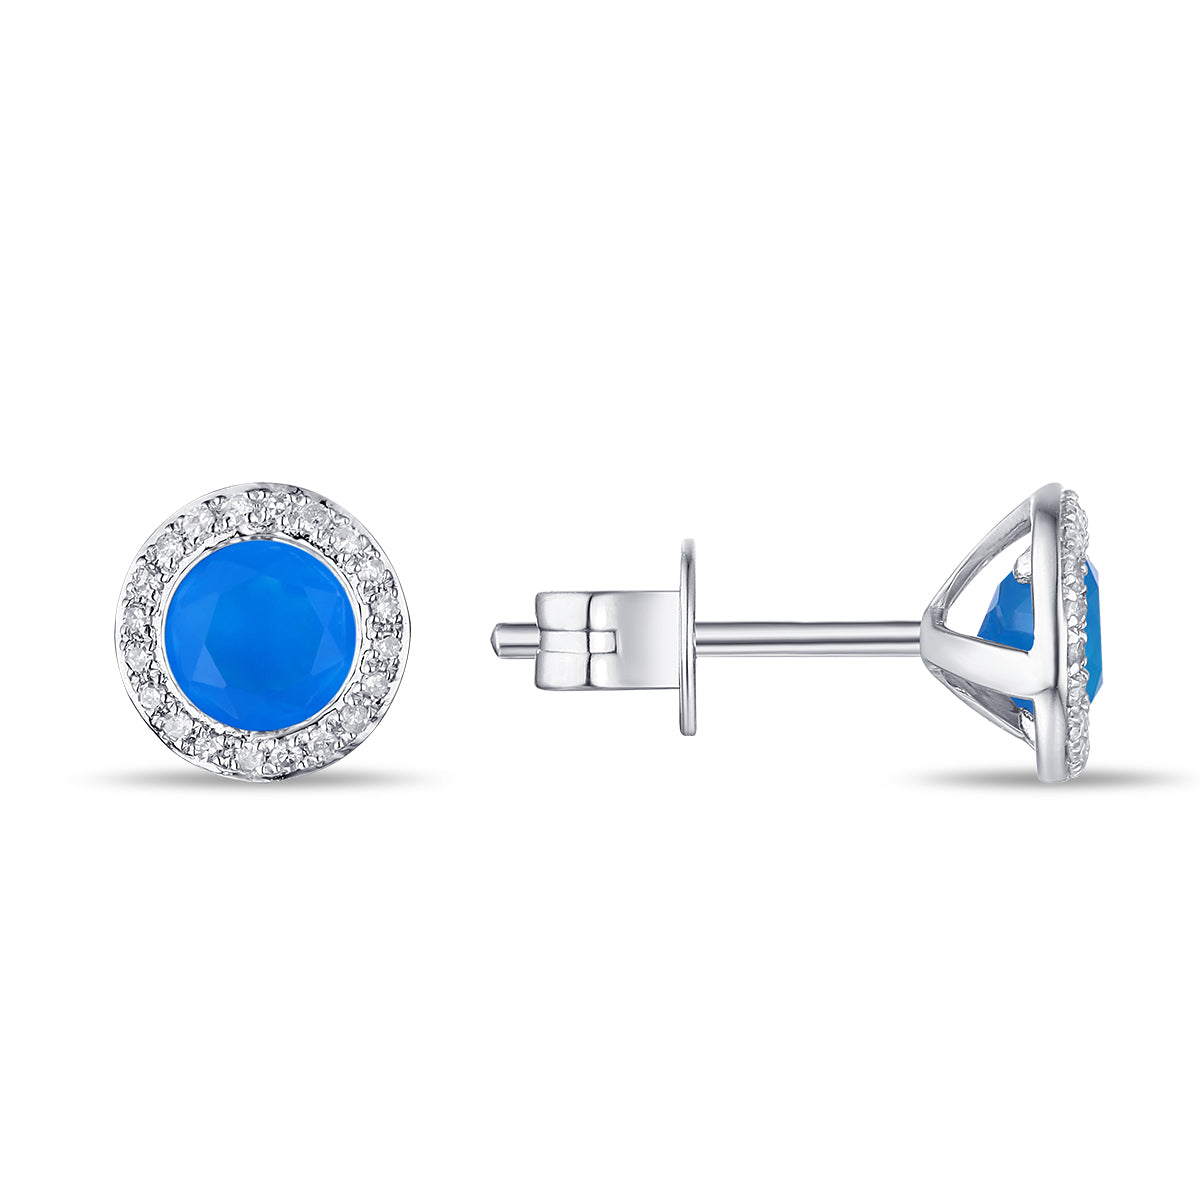 Tourquoise blue agate with diamonds earrings by jewelry designer Luvente